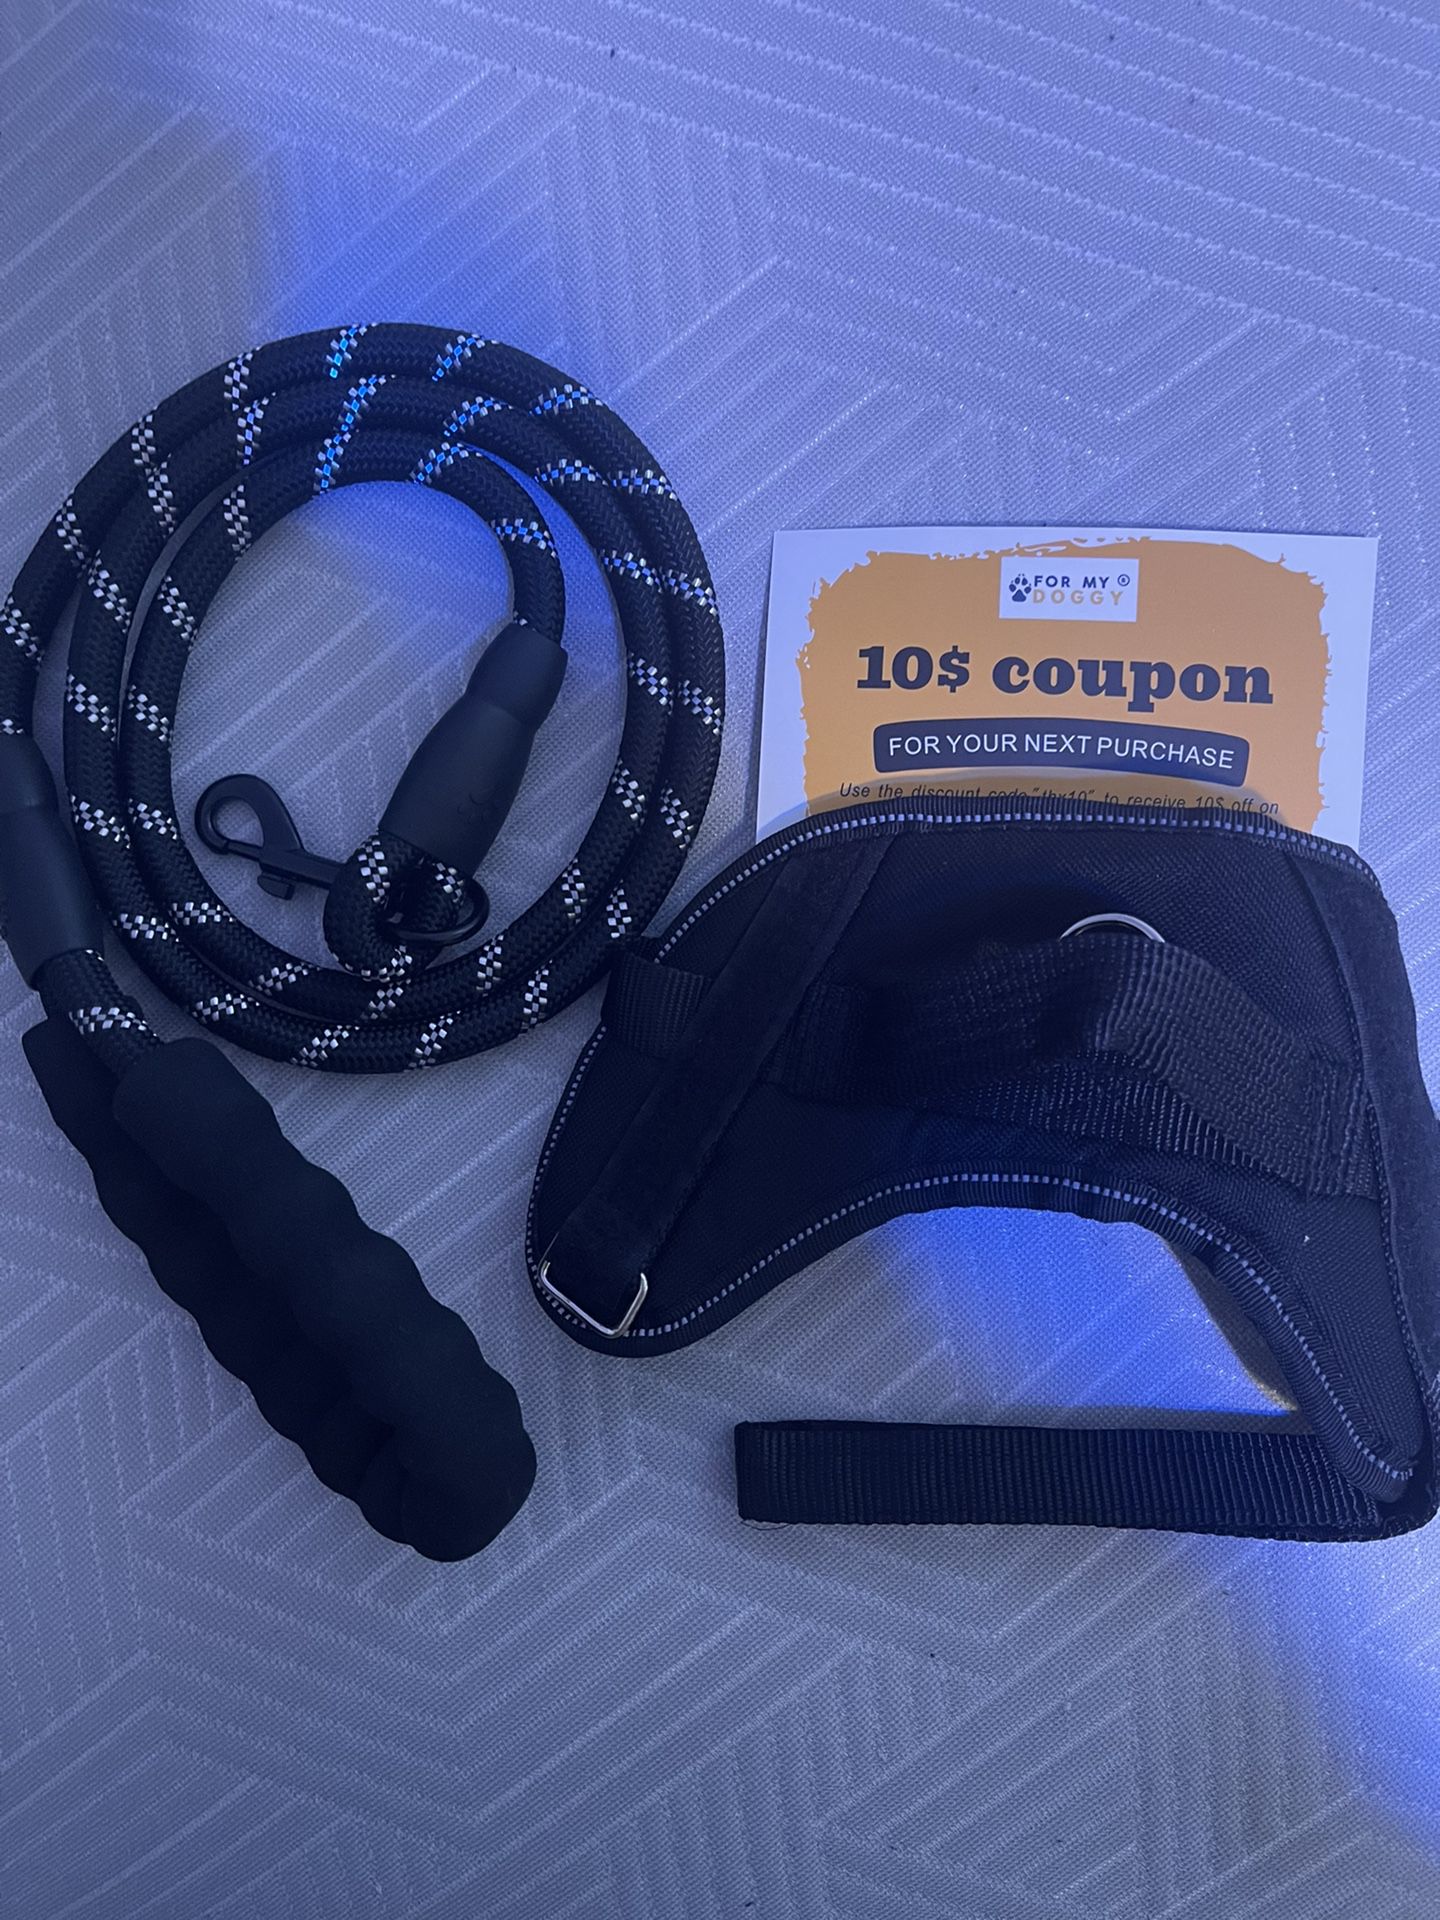 No-pull Harness, Leash, 10% Off Coupon